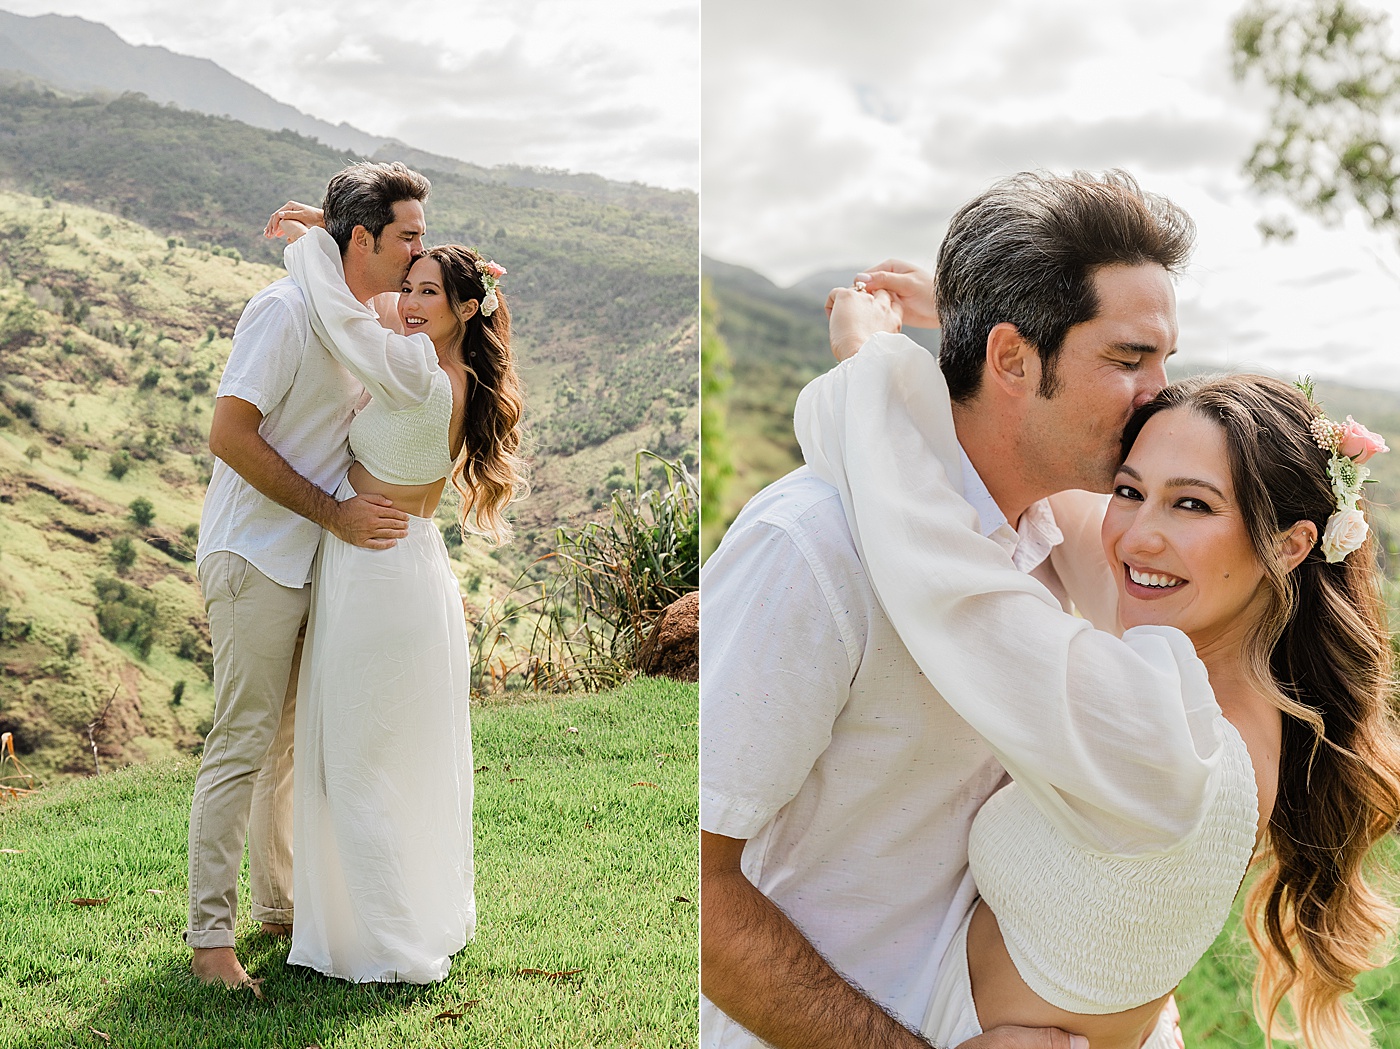 Bride and groom portraits at Elopement ceremony at Waialua Valley Farms